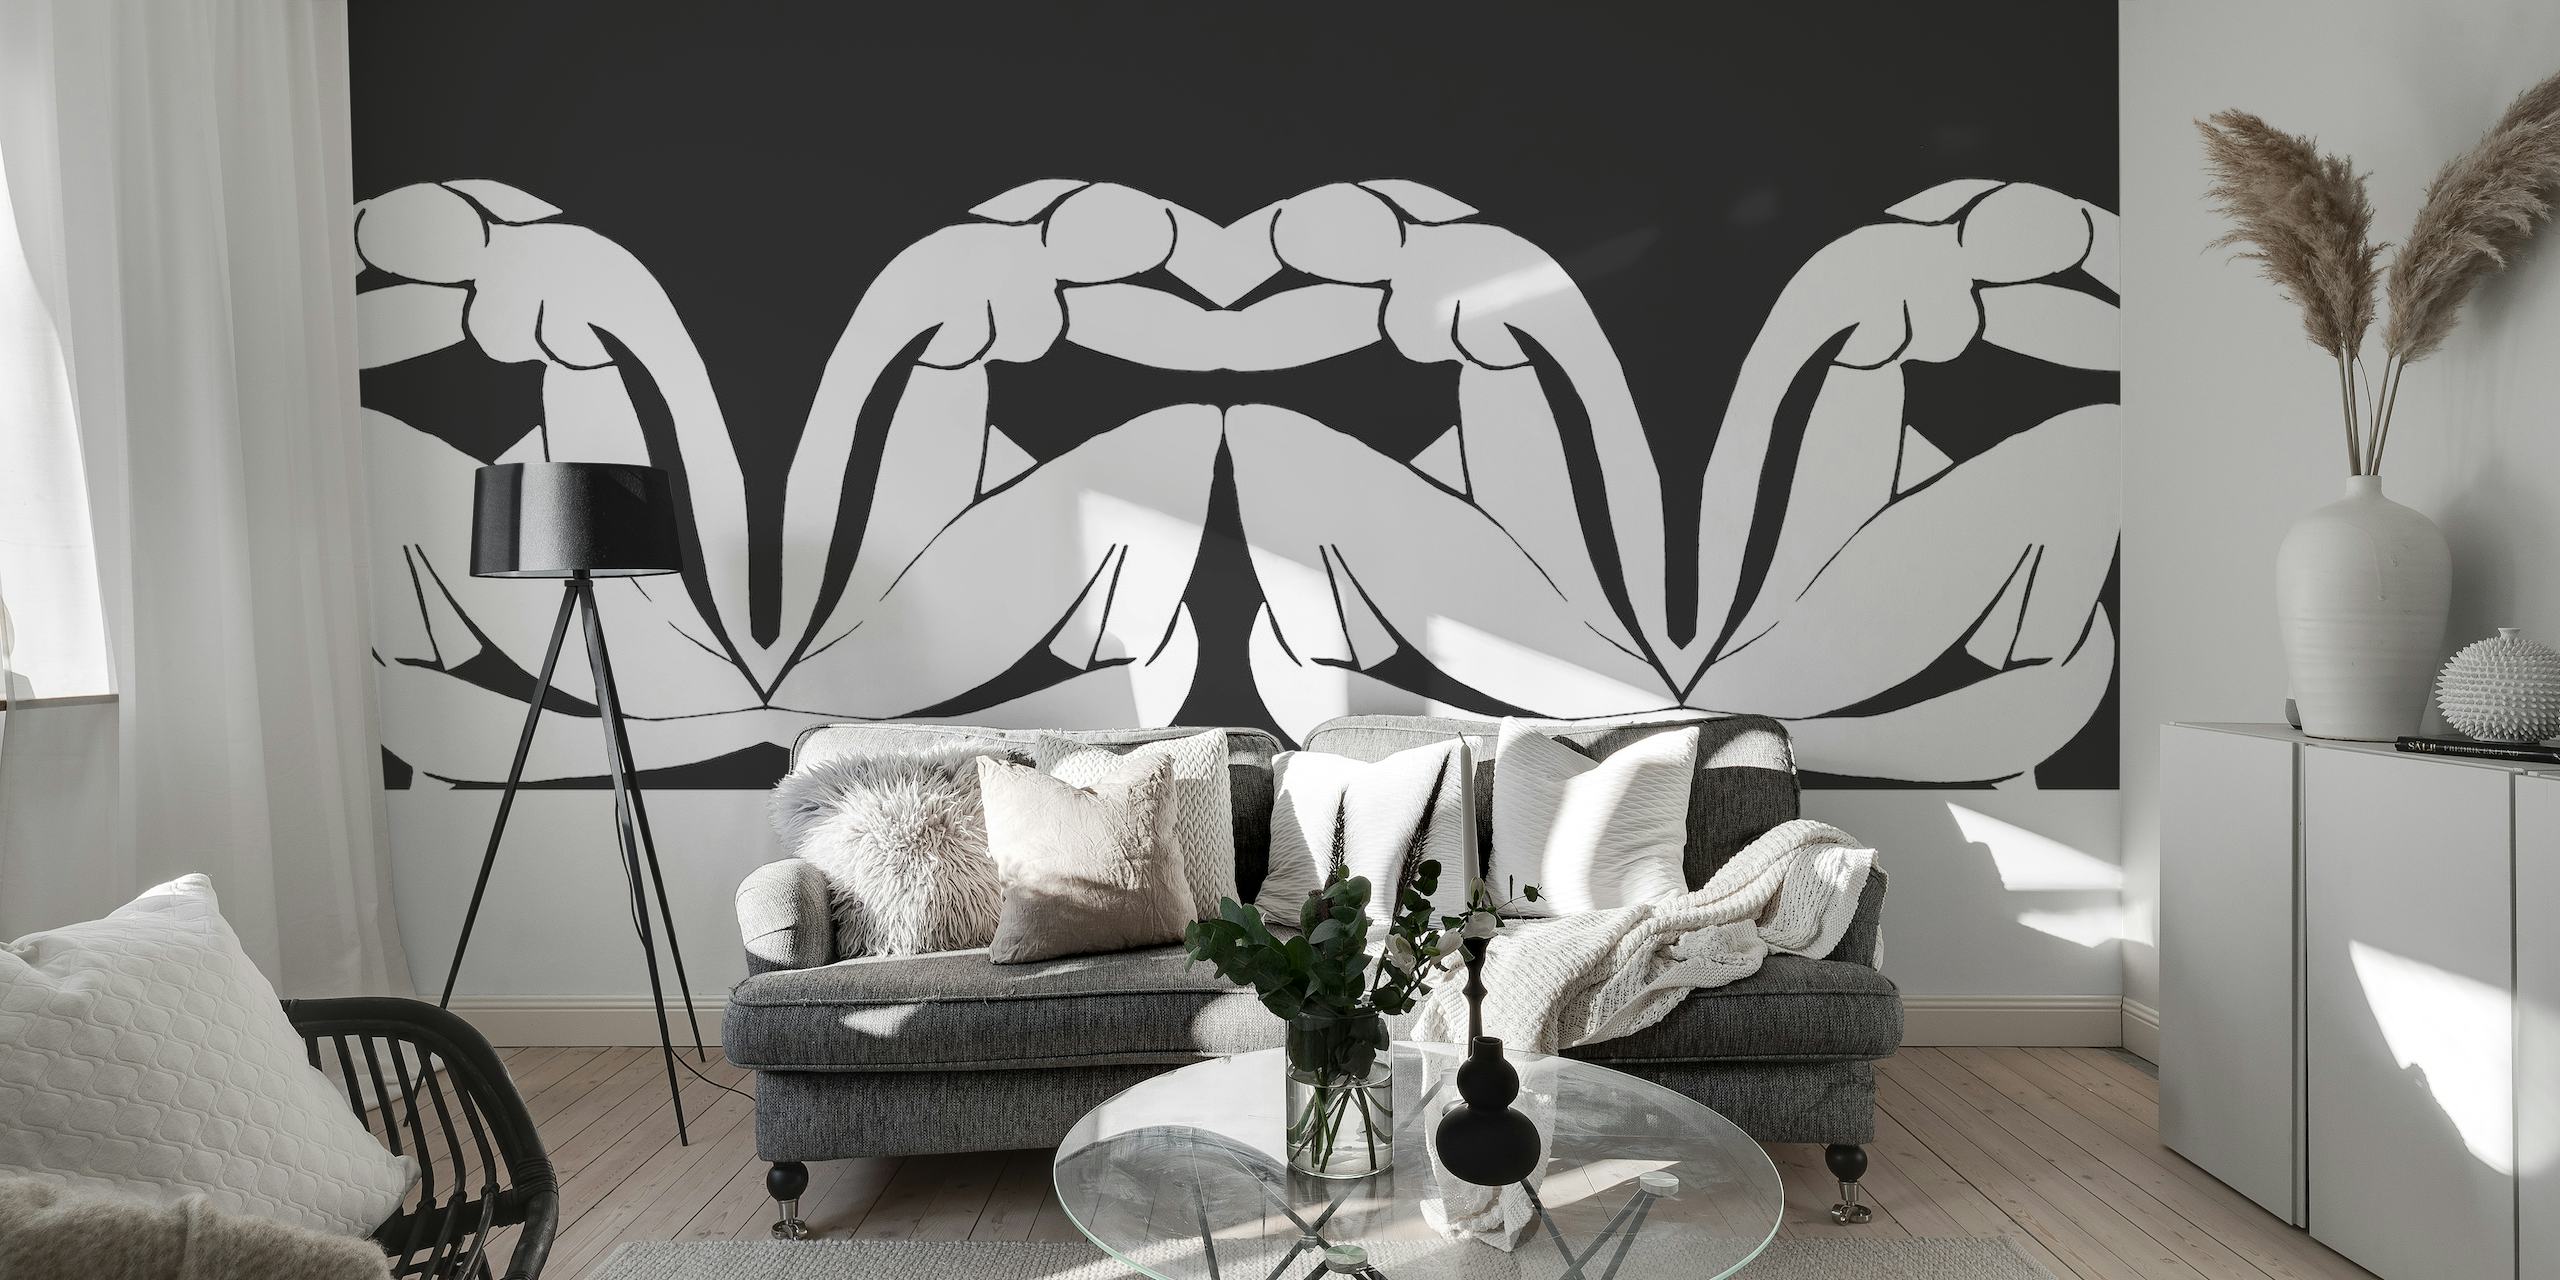 Matisse-inspired silhouette wall mural featuring female figures in black and white